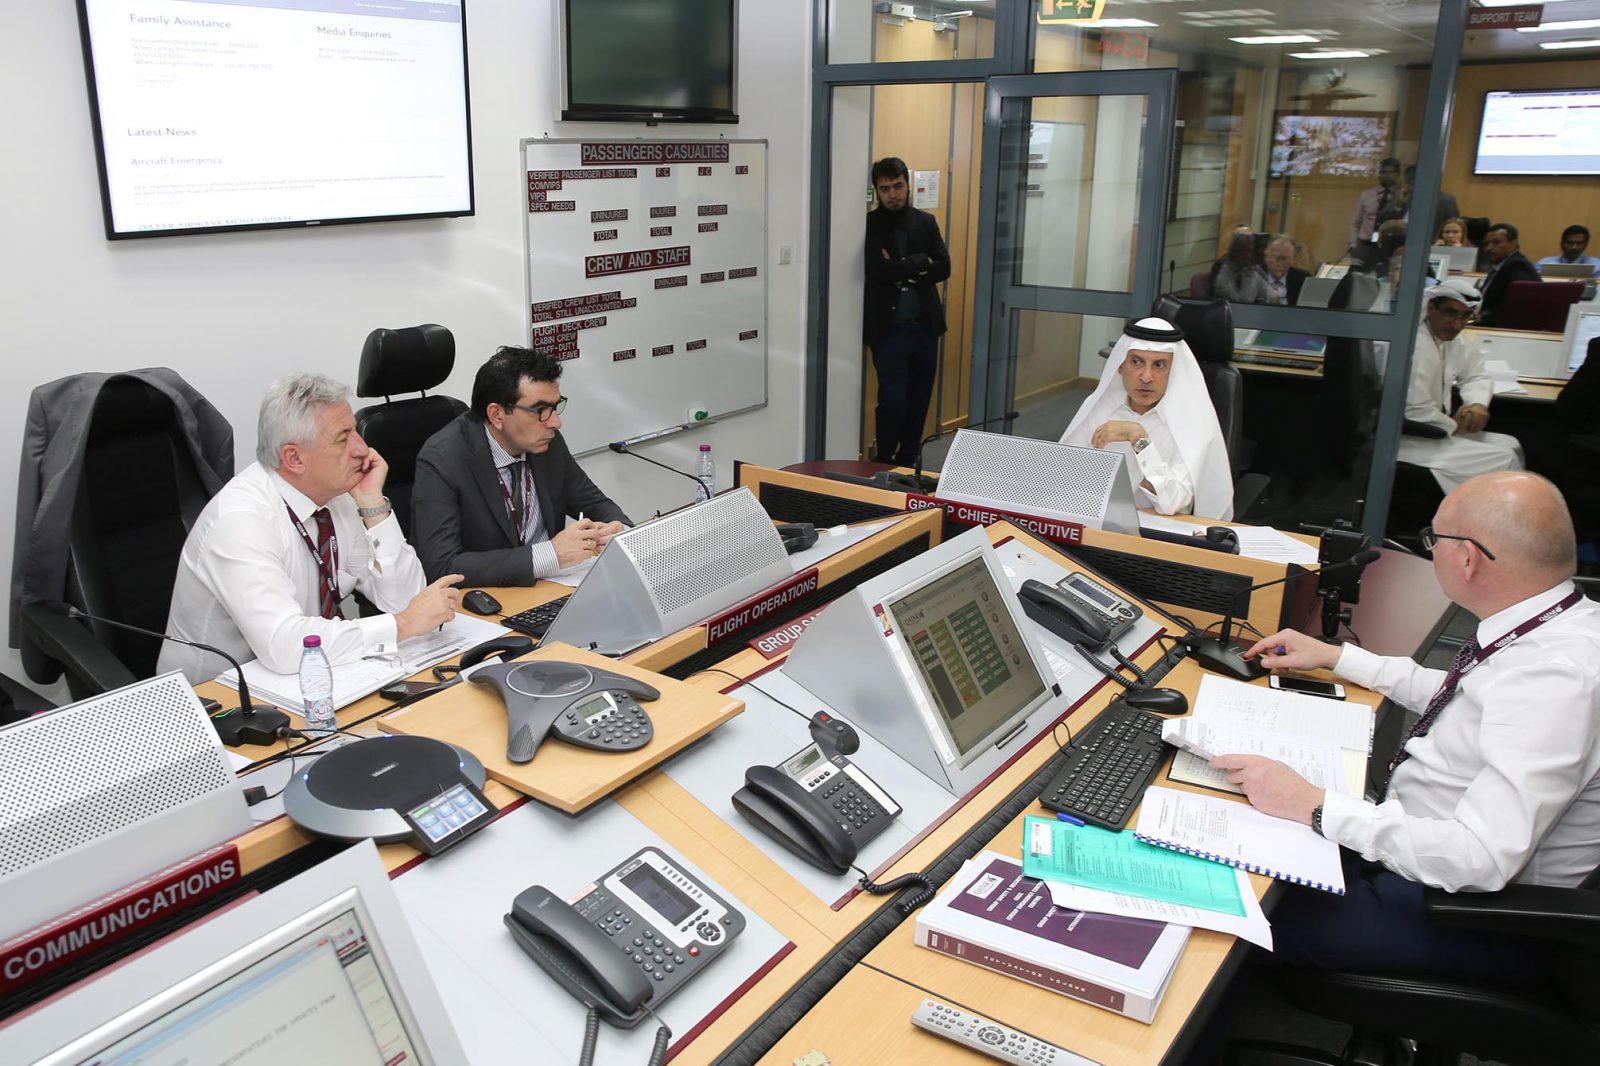 28 Government Agencies Respond to Qatar Airways 'Crash' in Mock Exercise